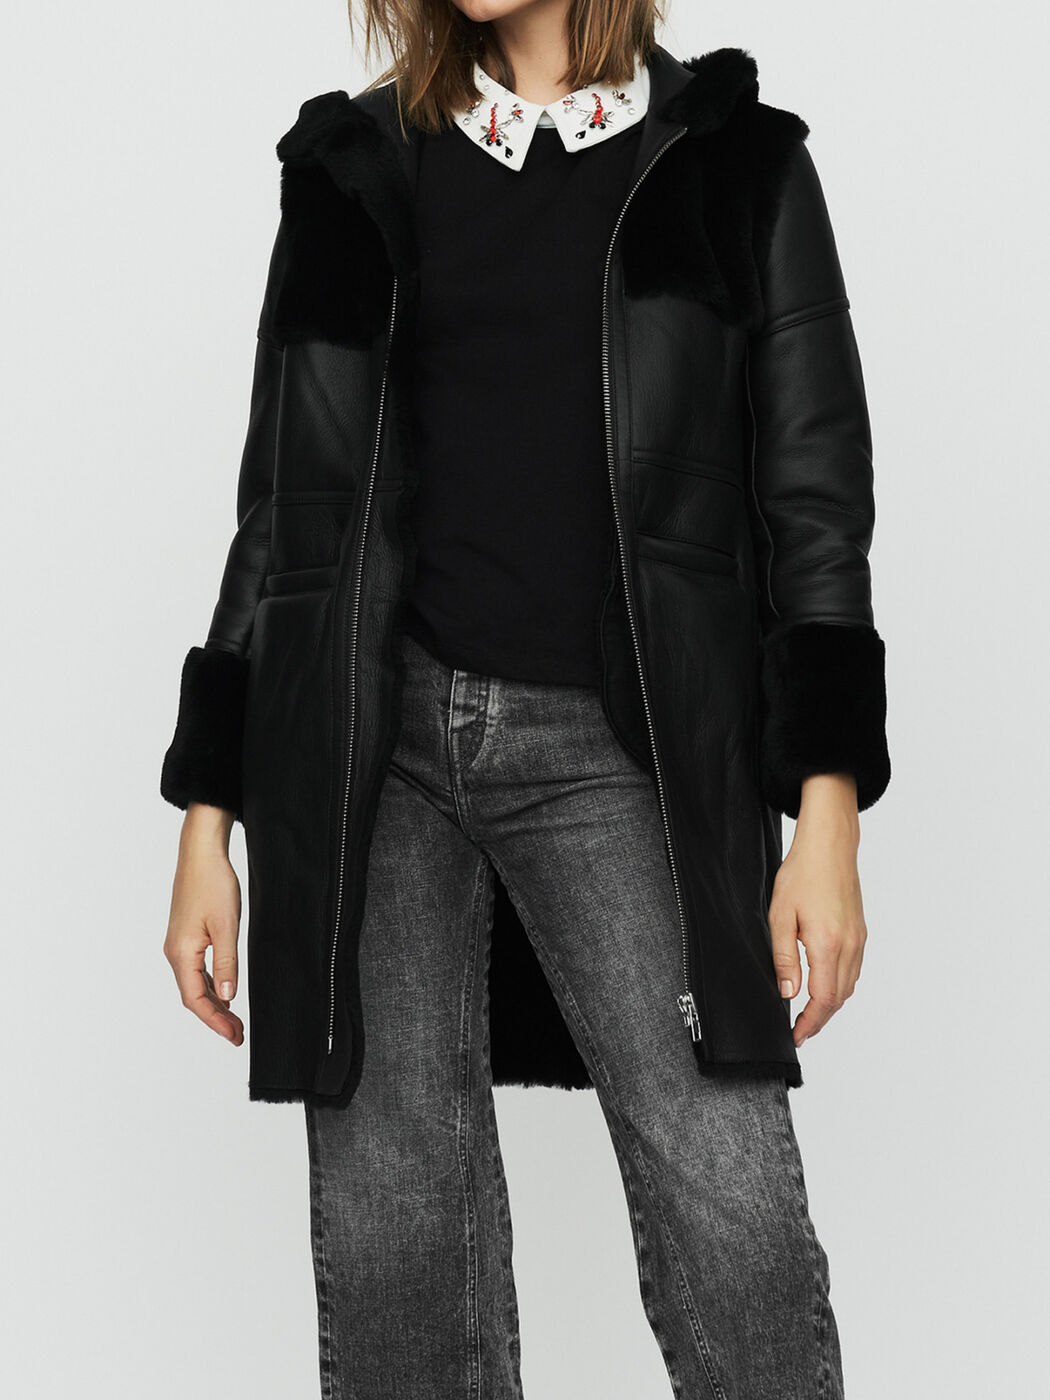 Maje Long shearling coat with mixed material at £795 | love the brands